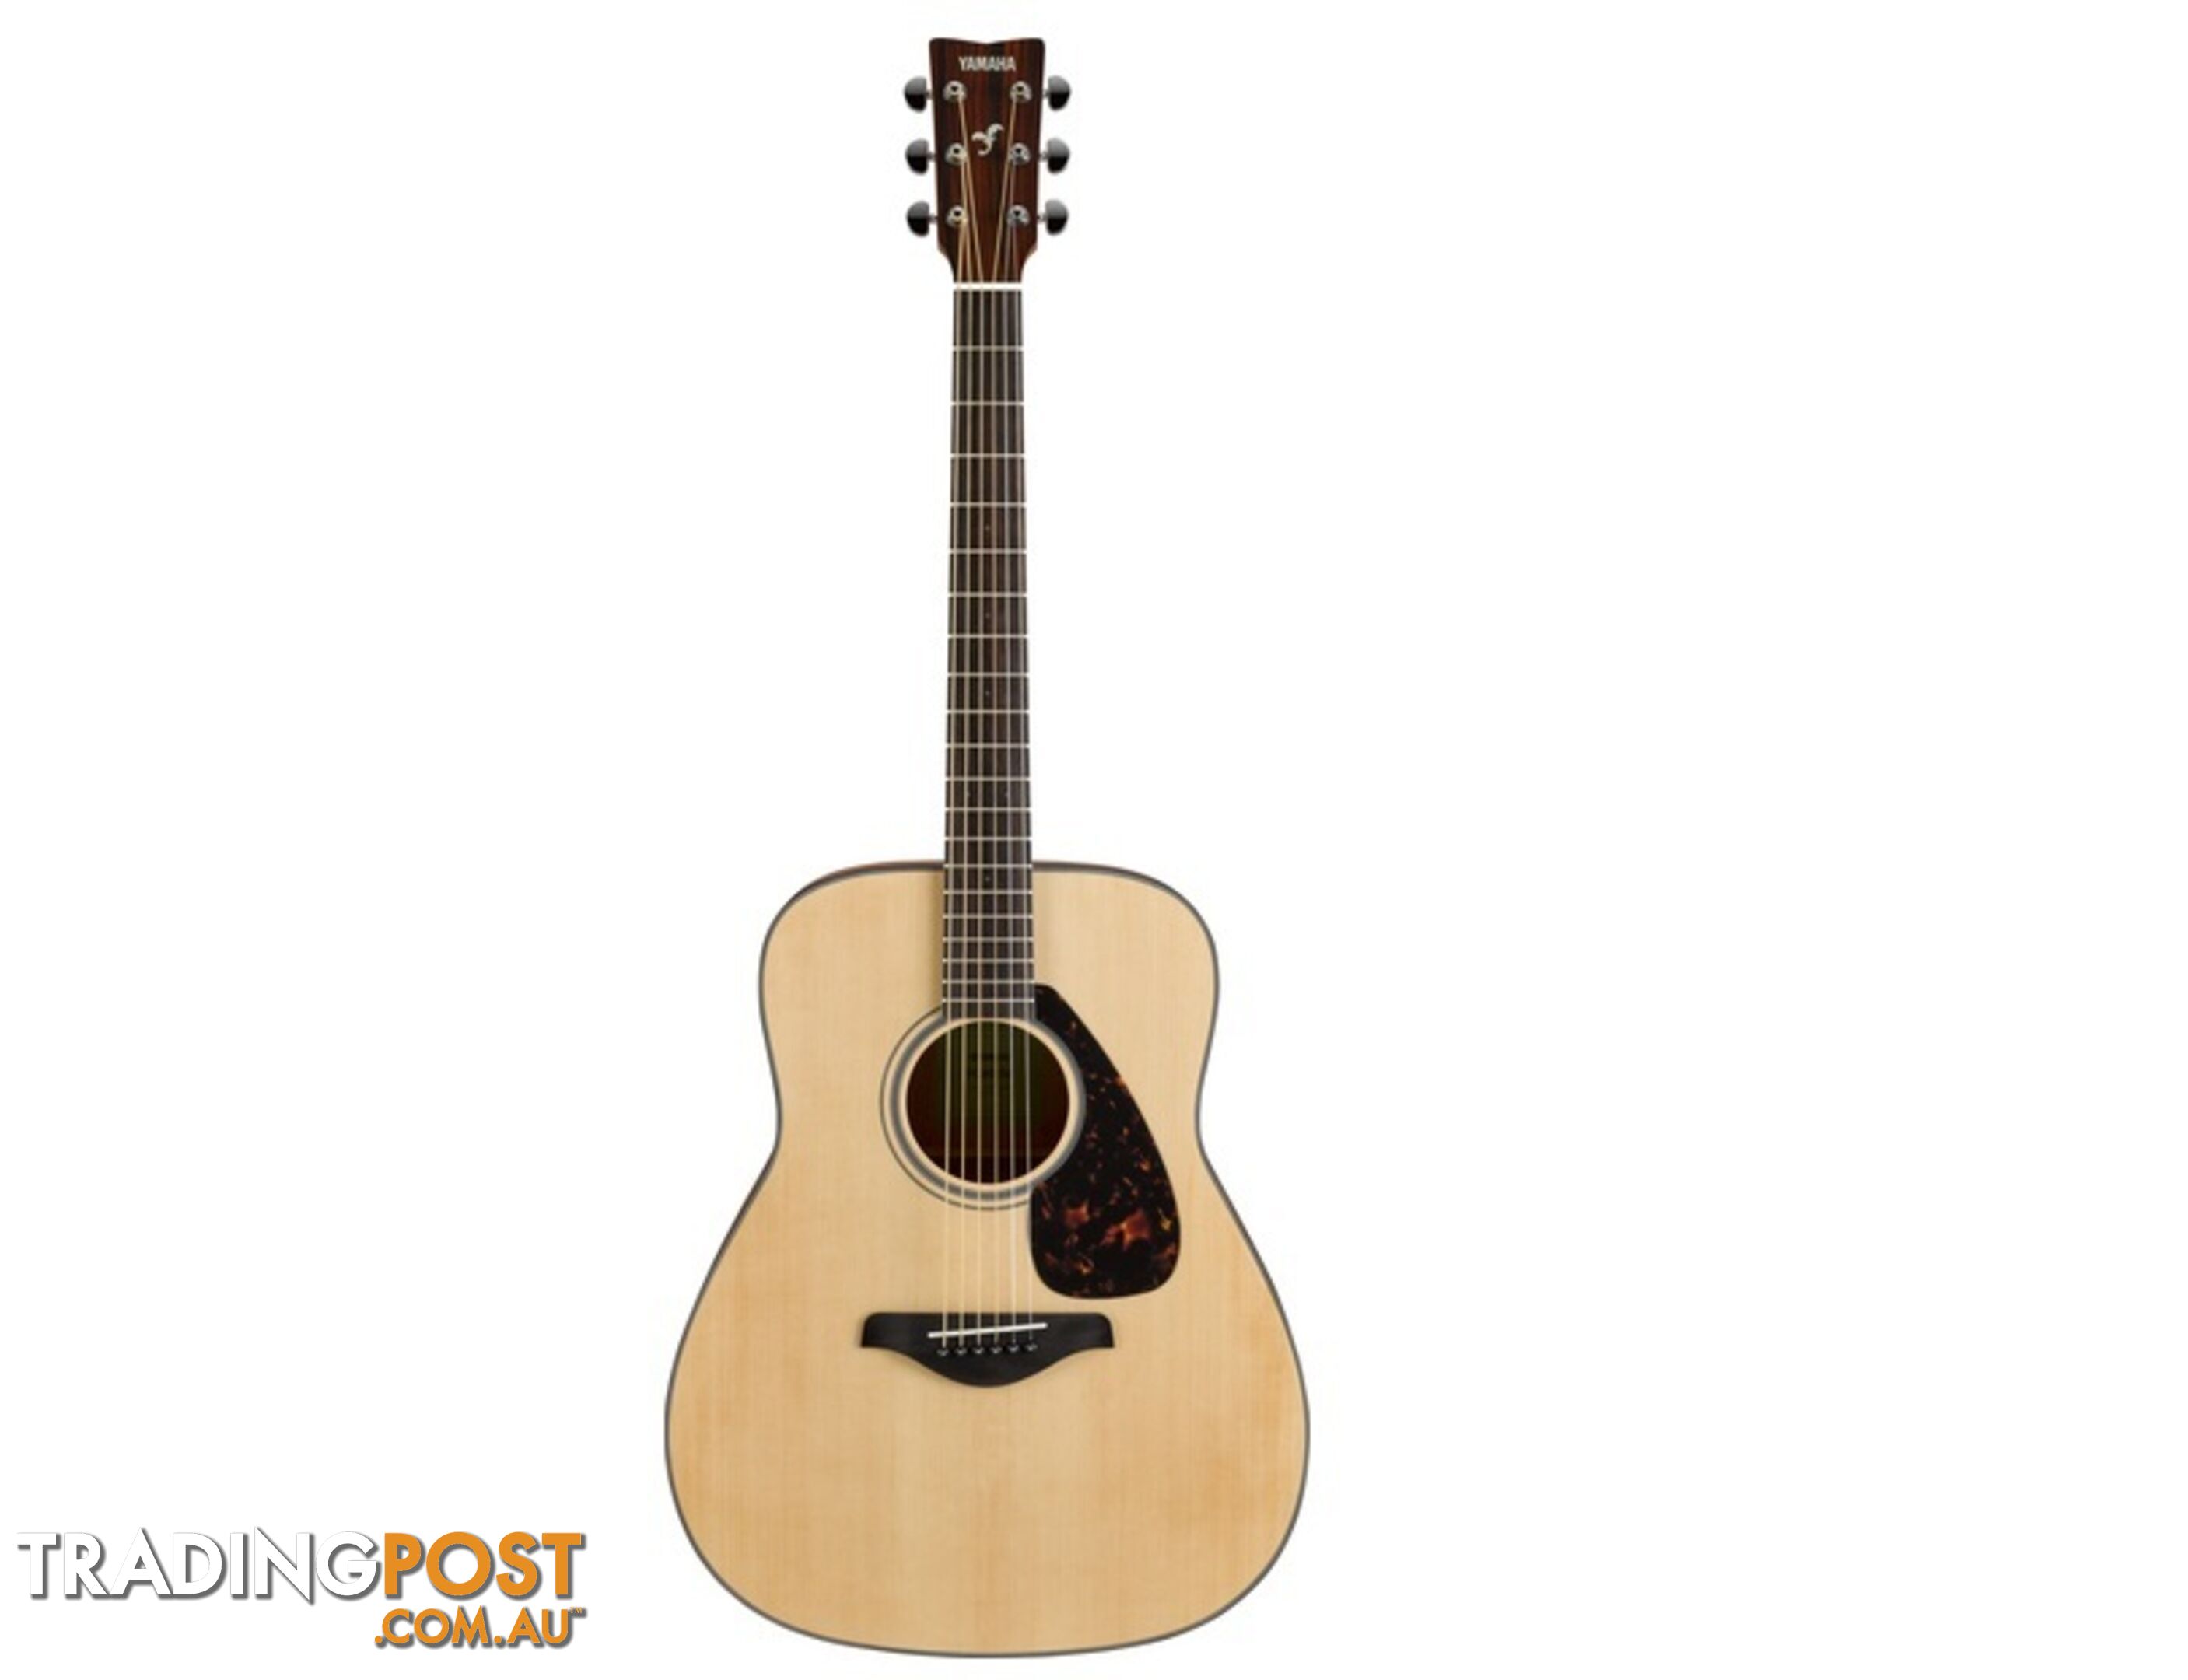 Yamaha Gigmaker 800M Acoustic Guitar Pack